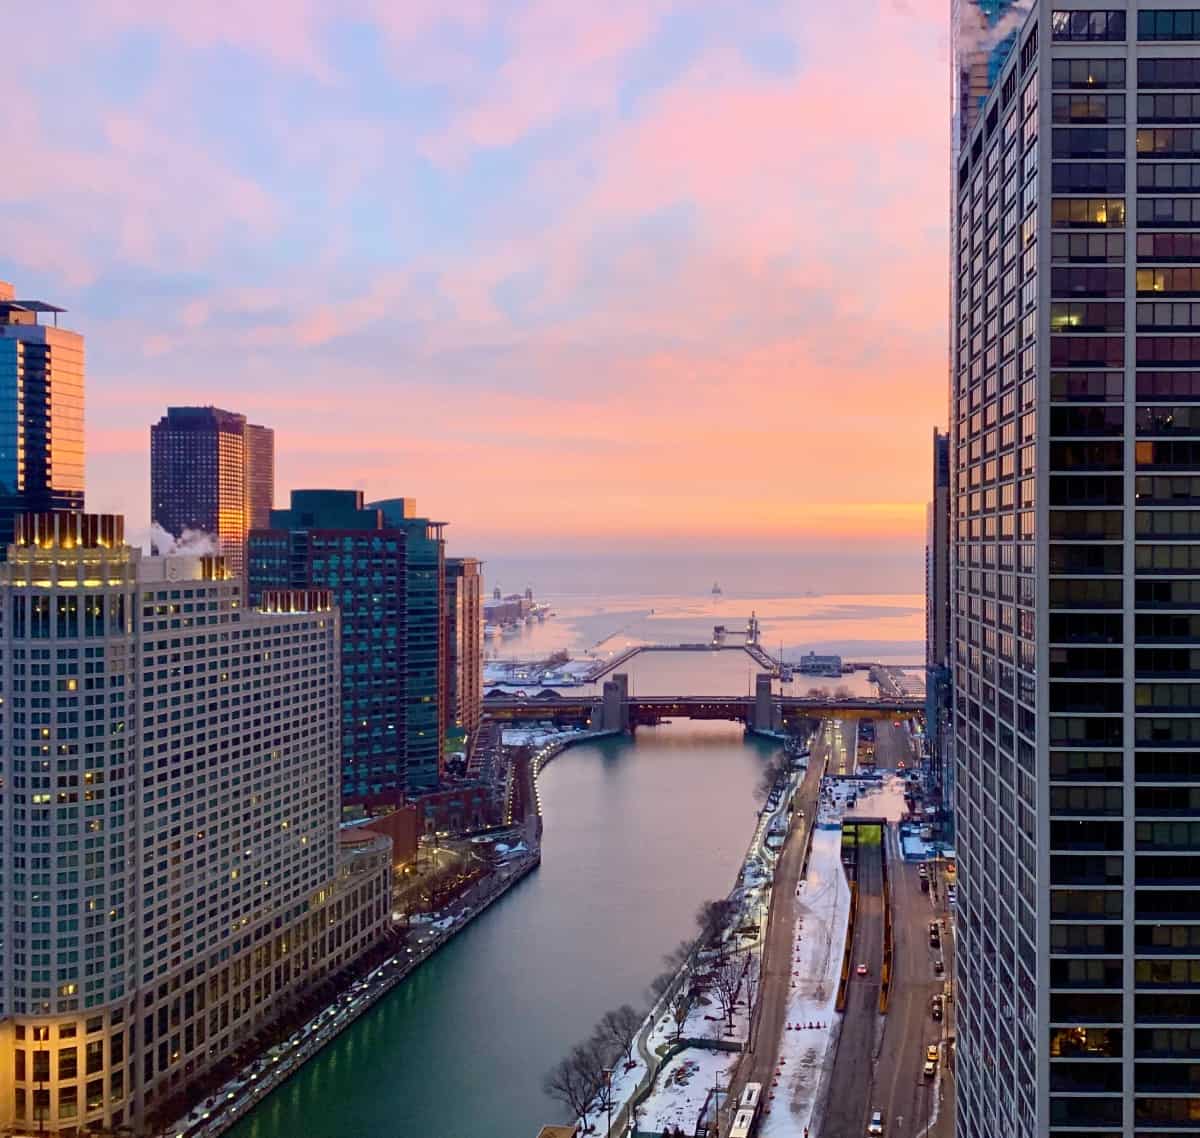 Chicago photography tips & other city photography tips - don't underestimate how amazing sunrise is